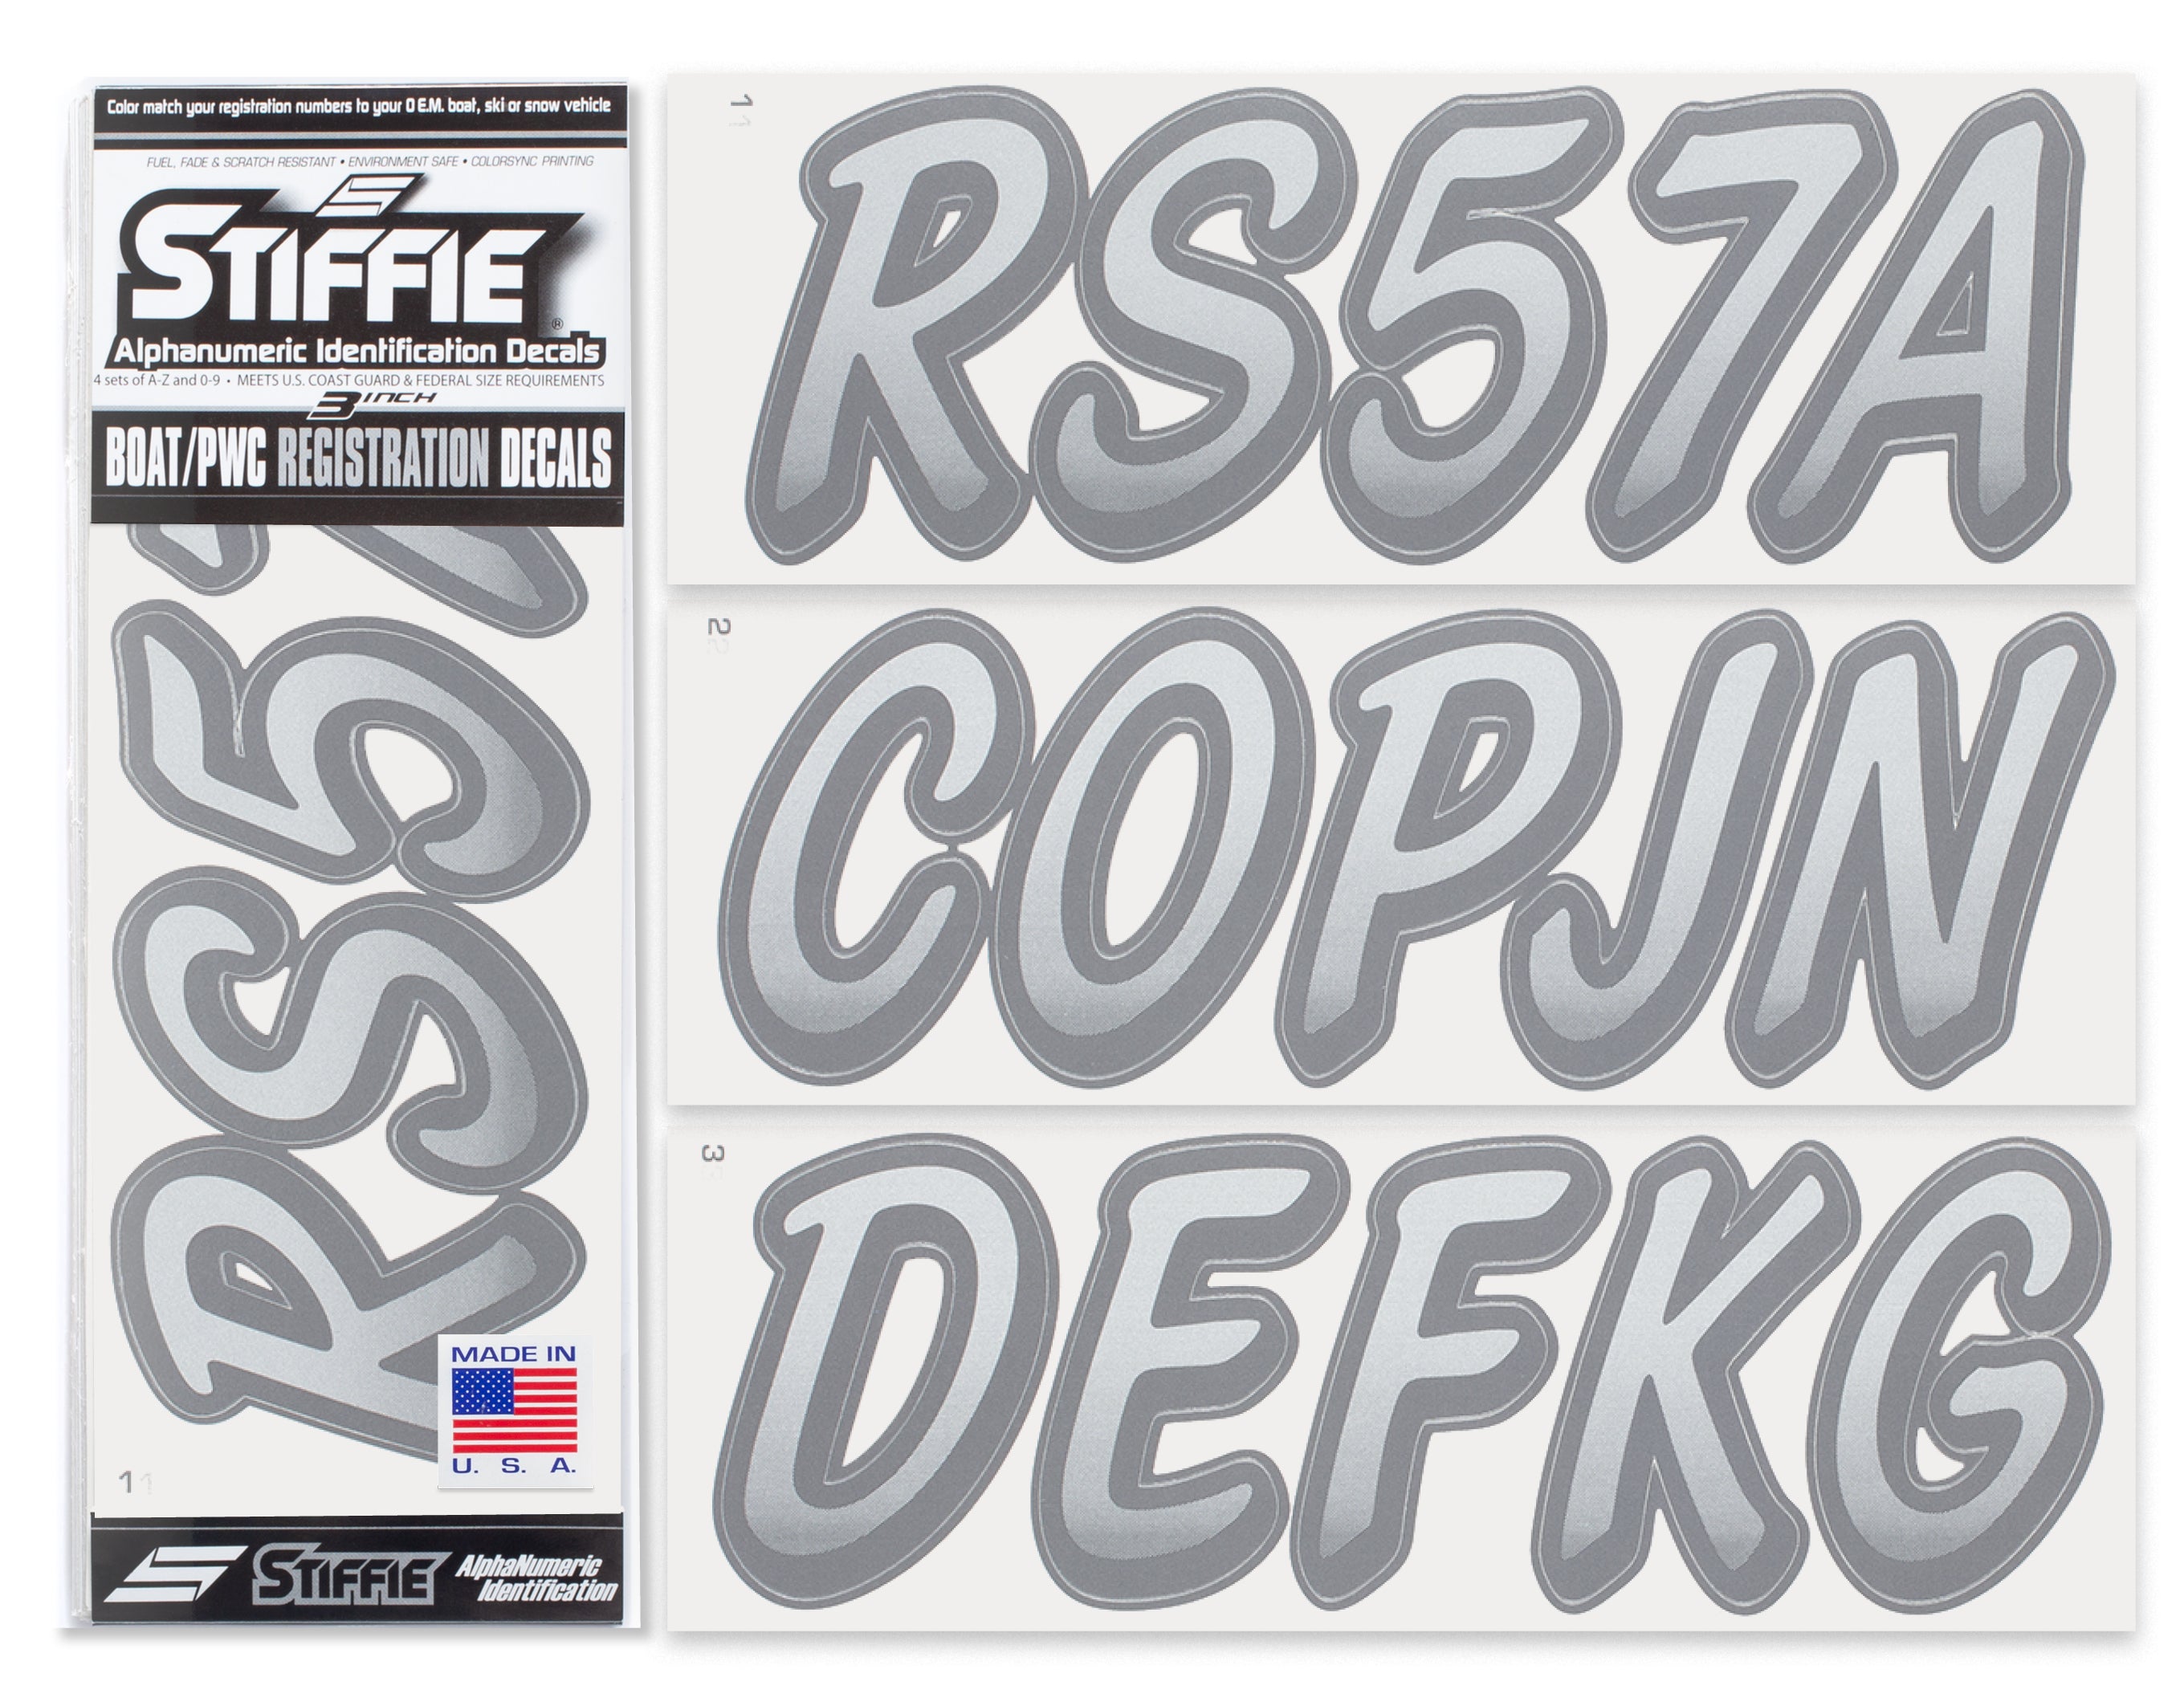 Stiffie Whipline Met. Silver/Met. Carbon 3" Alpha-Numeric Registration Identification Numbers Stickers Decals for Boats & Personal Watercraft